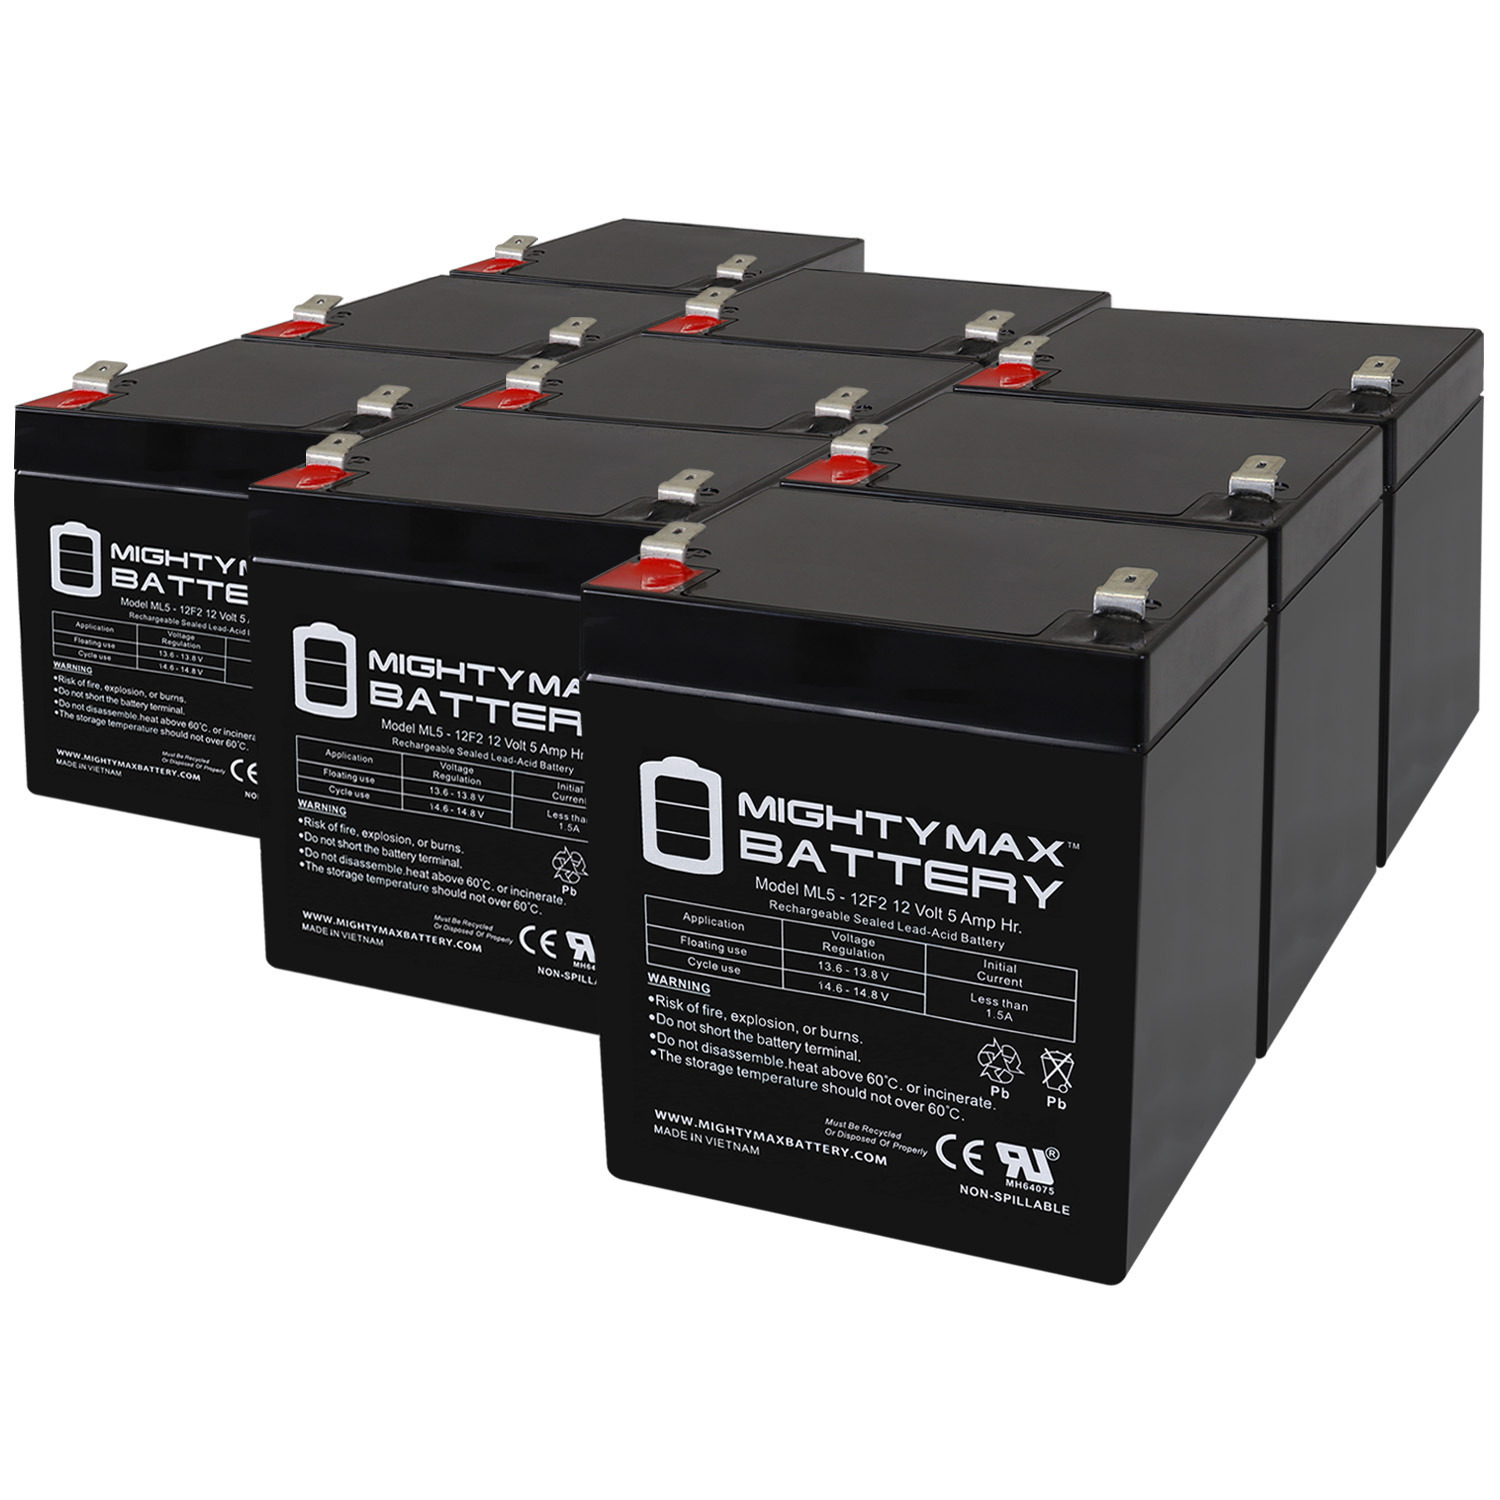 12V 5Ah F2 SLA Replacement Battery for Roketa ES-47 E-Scooter - 9 Pack